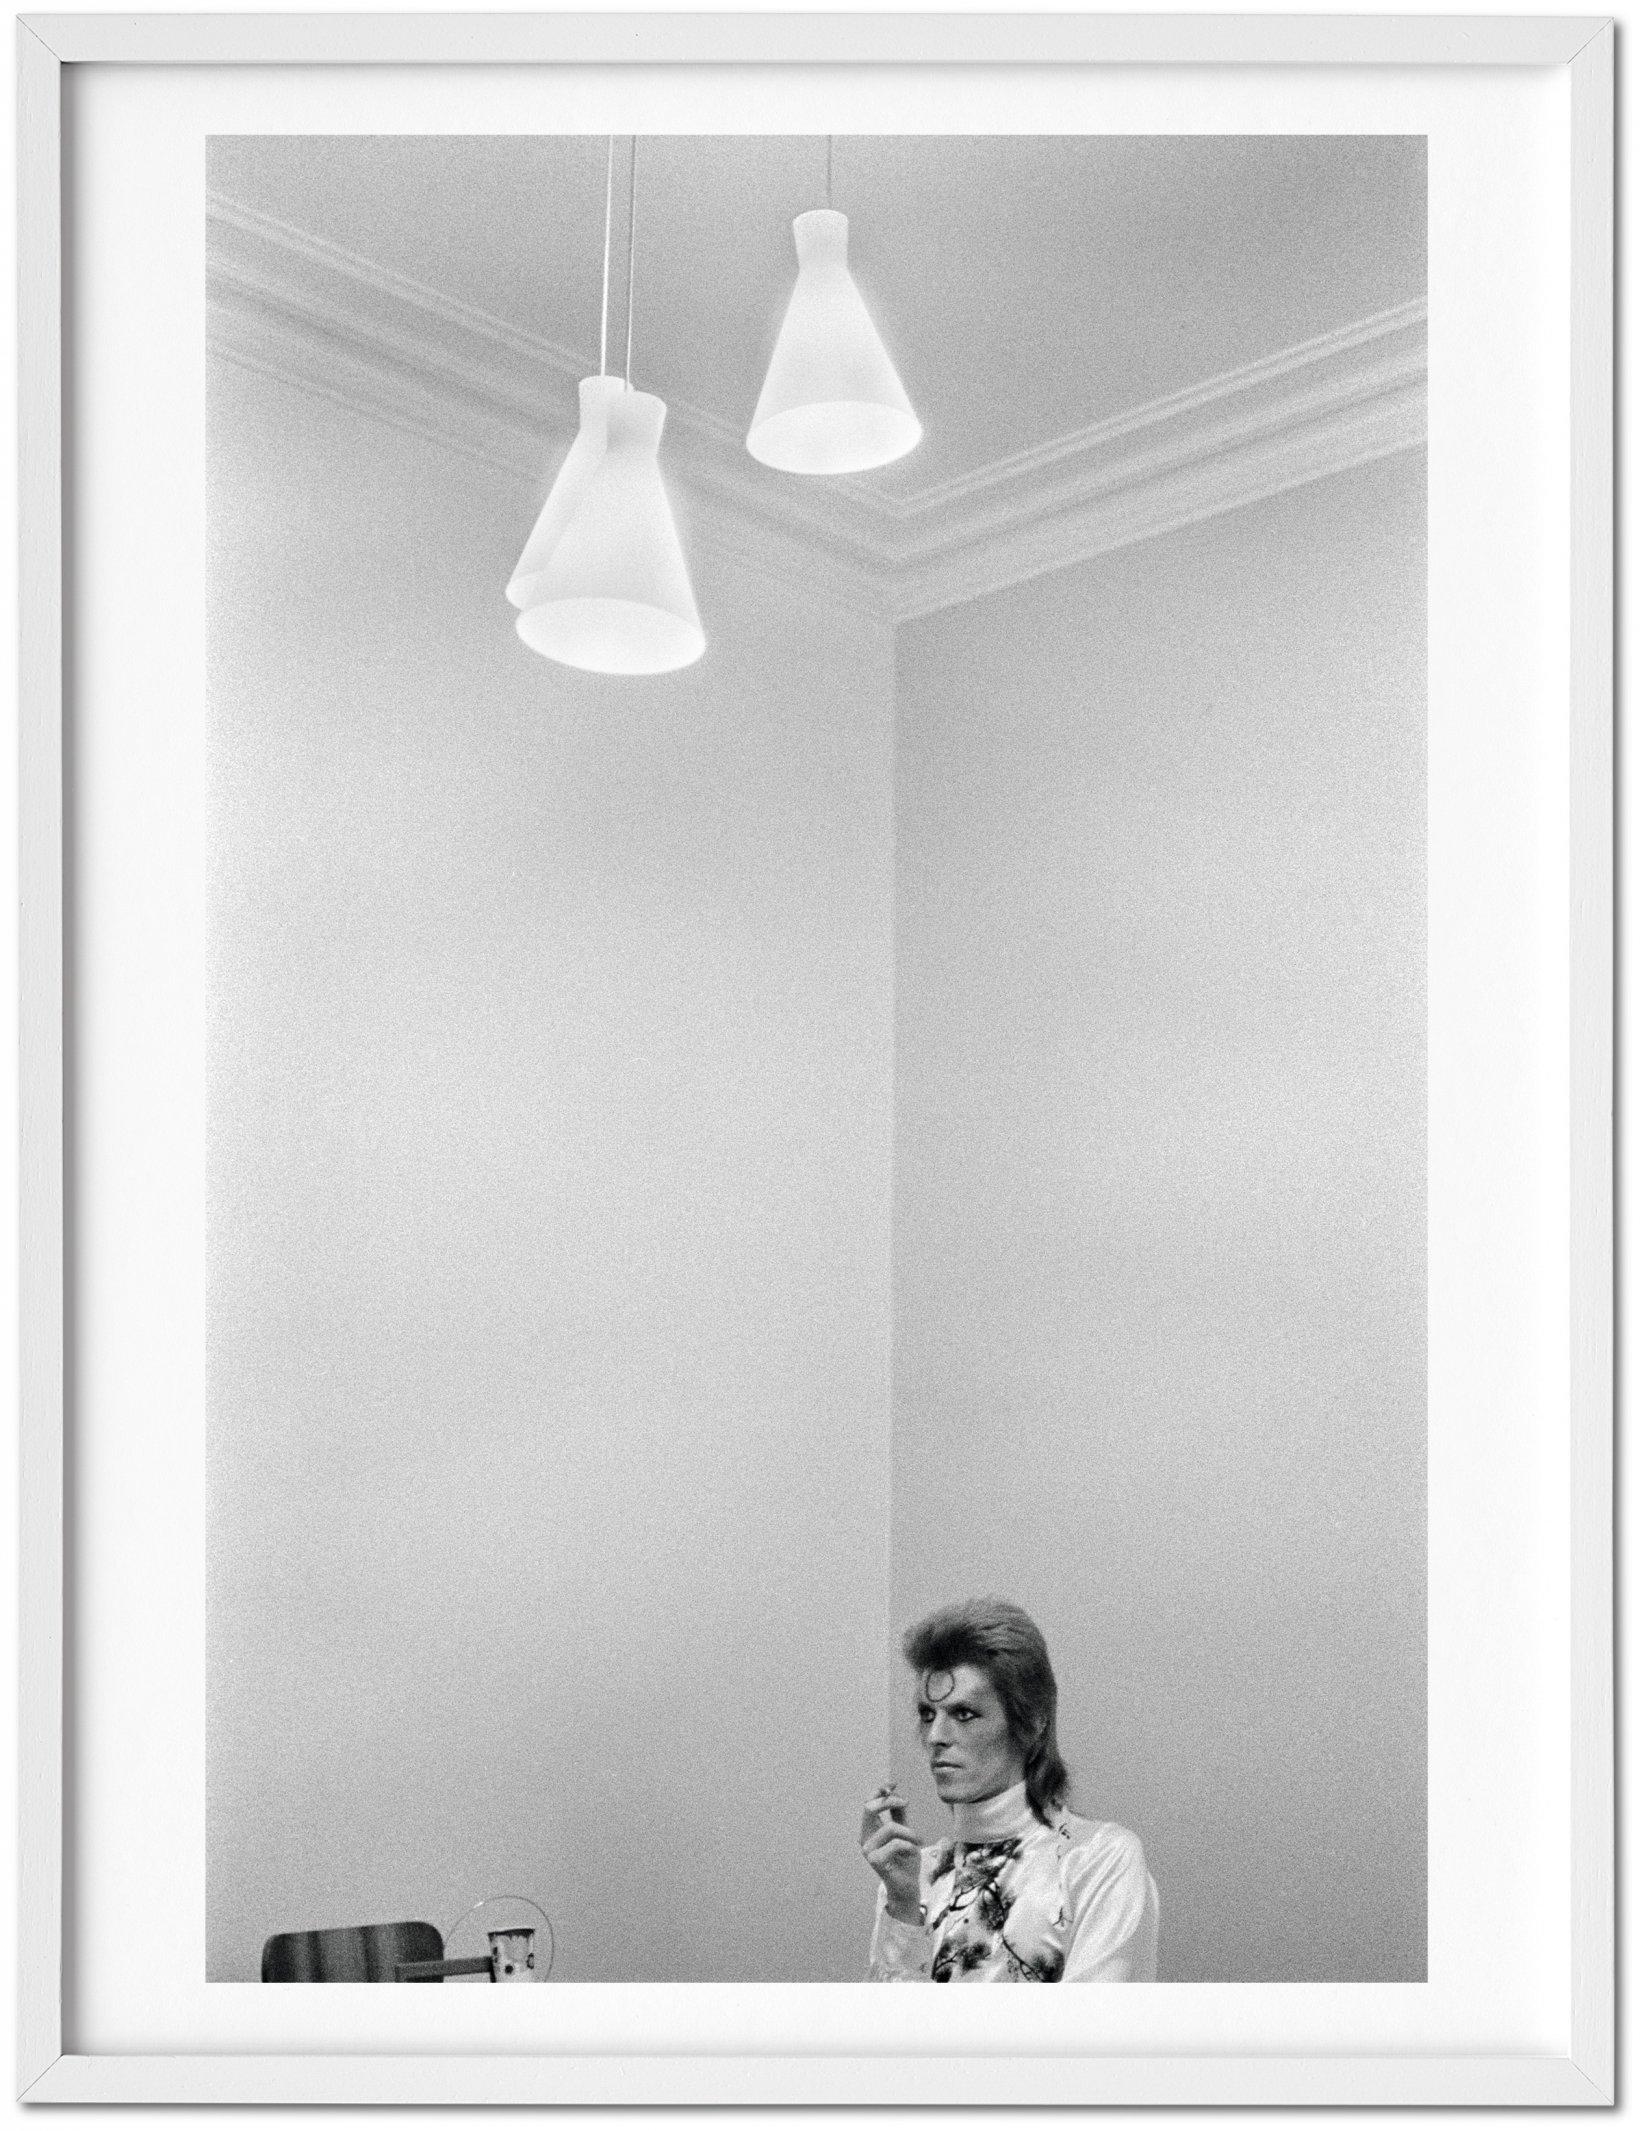 Mick Rock Black and White Photograph - David Bowie - Limited TASCHEN Art Edition with Hand-Signed Pigment Print - New